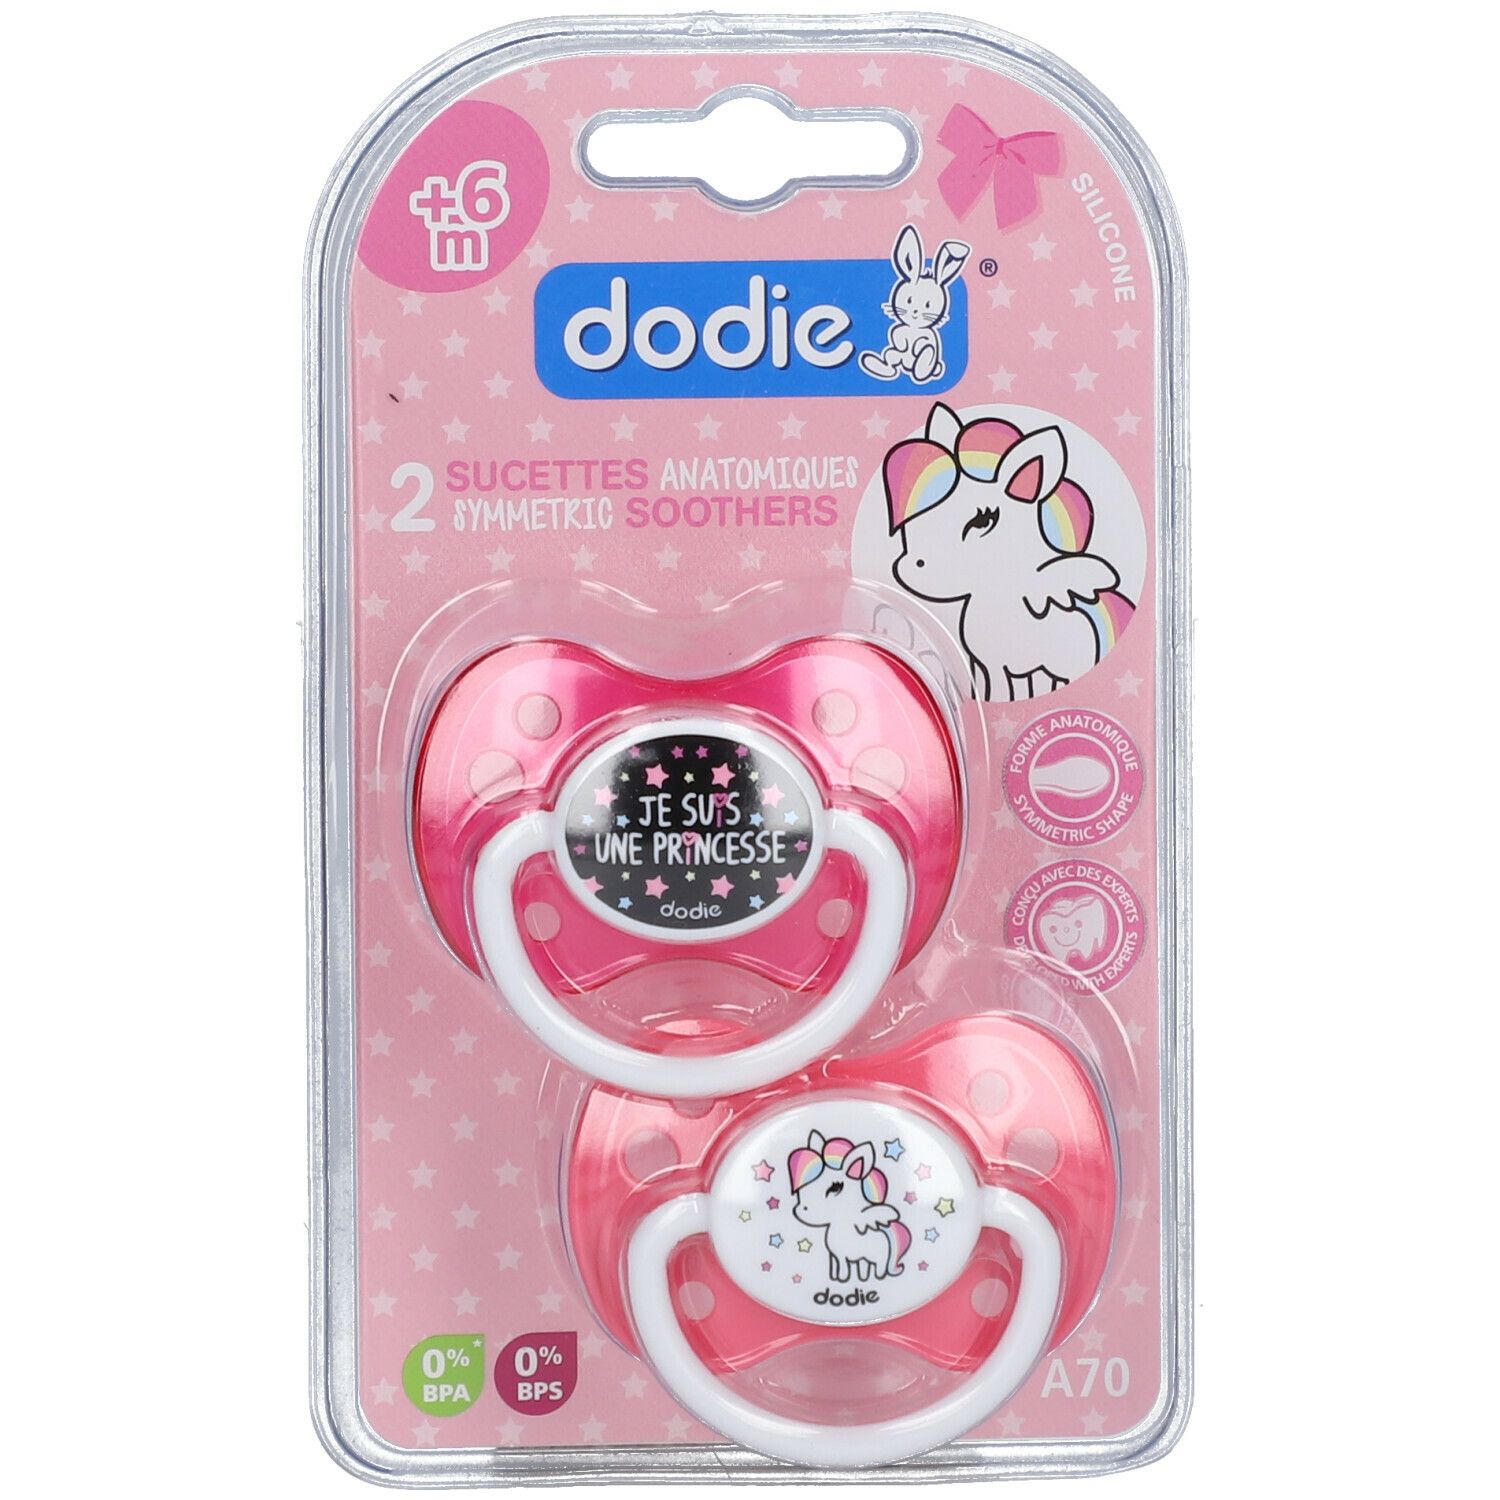 dodie® Duo sucettes +18 mois Motiv "Duo girly"